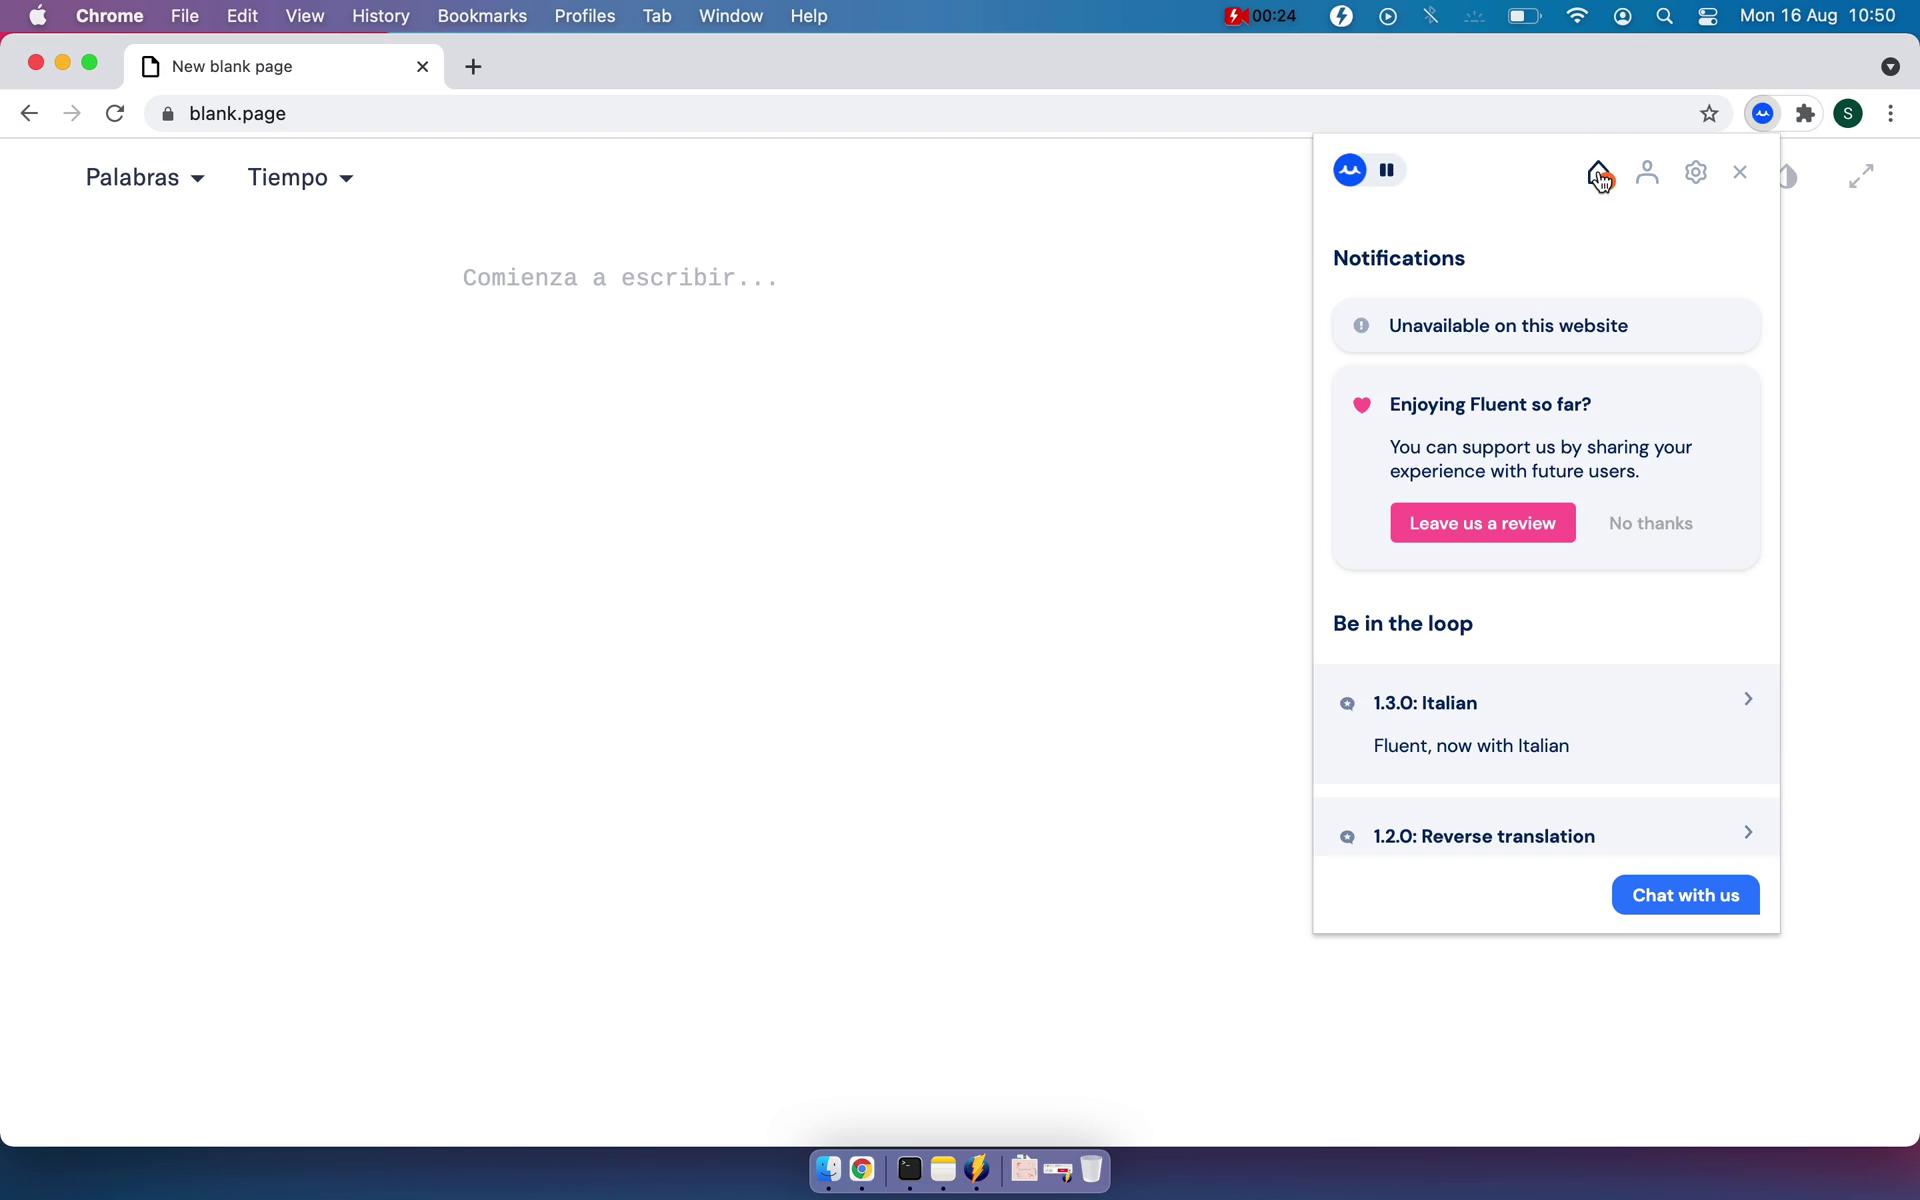 Screenshot of Home on General browsing on Fluent user flow